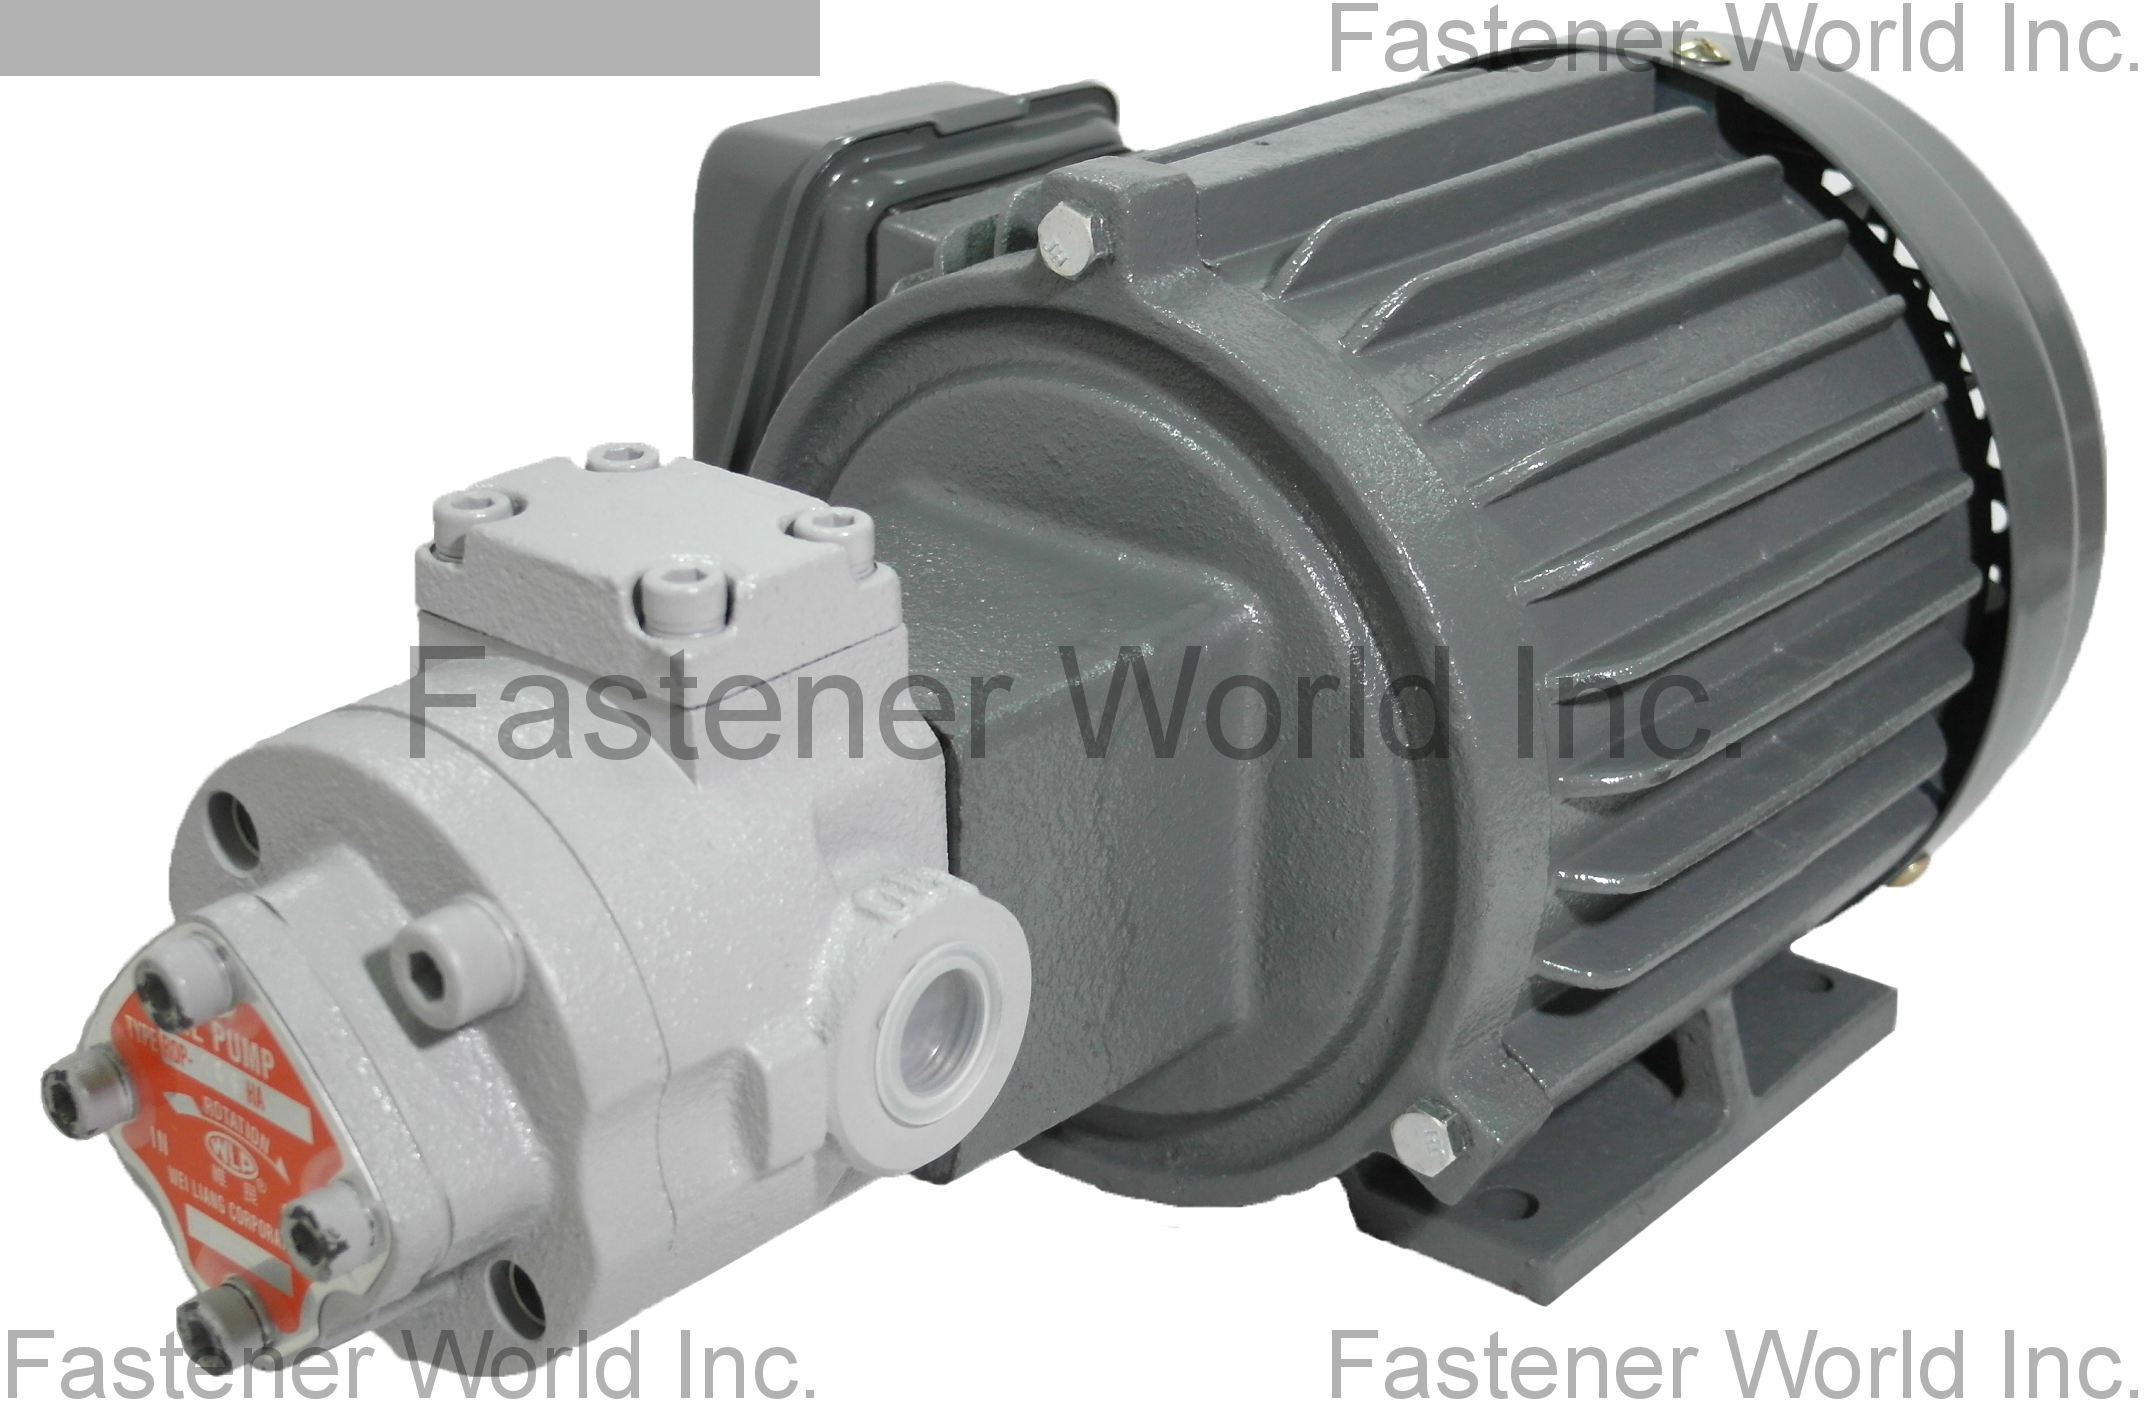 WEI LIANG CORPORATION , ROP-2HA Heavy Oil Trochoid Pump with Motor , Centralized Lubrication Systems